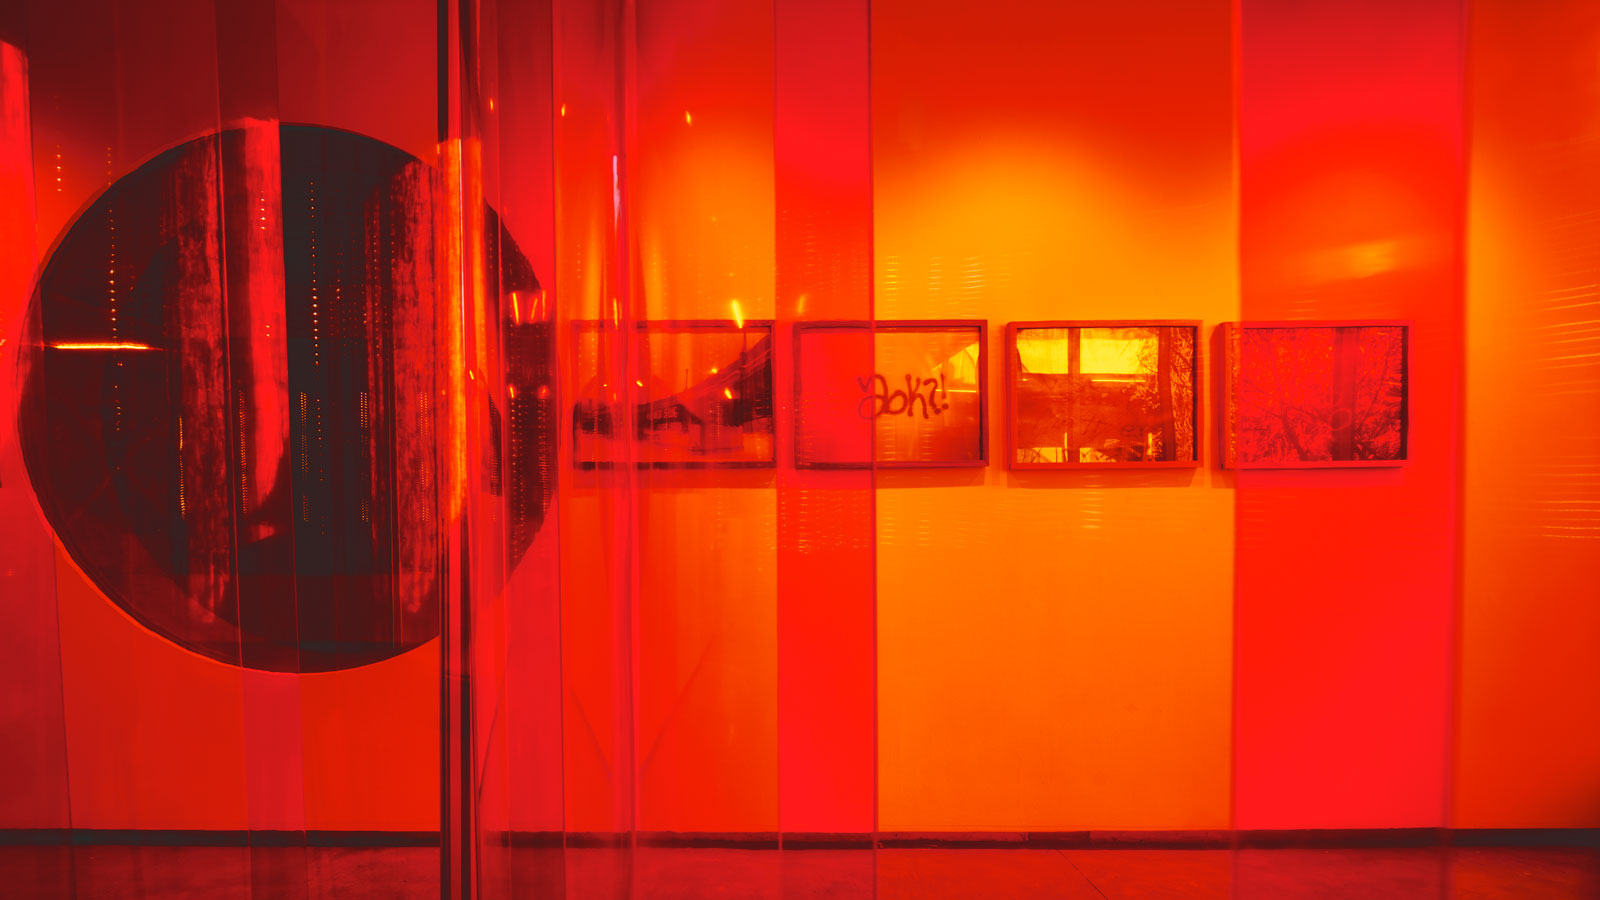 A red-tinted view of four photos titled "Bywalker" by PhD candidate Nicolau Spadoni, from inside "Echo Chamber" by visiting critics Emma Silverblatt & Ryan Whitby